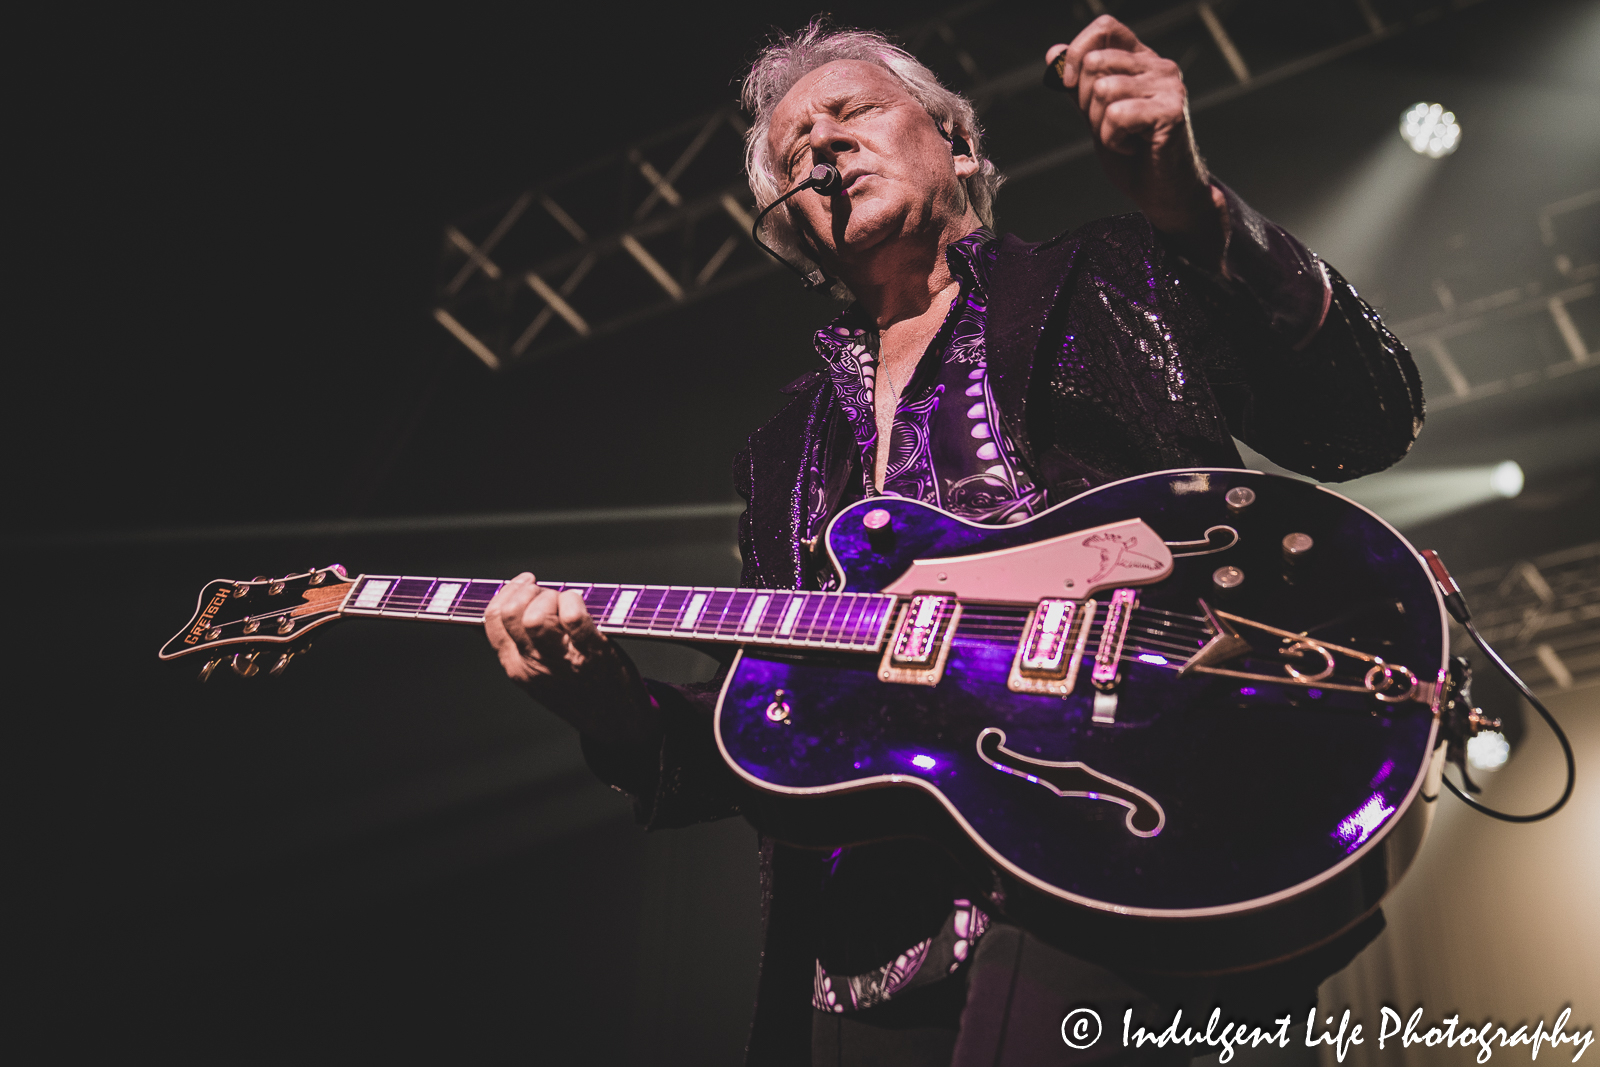 Guitar player and vocalist Graham Russell of soft rock duo Air Supply live in concert performing "Just as I Am" at Ameristar Casino's Star Pavilion in Kansas City, MO on May 5, 2023.